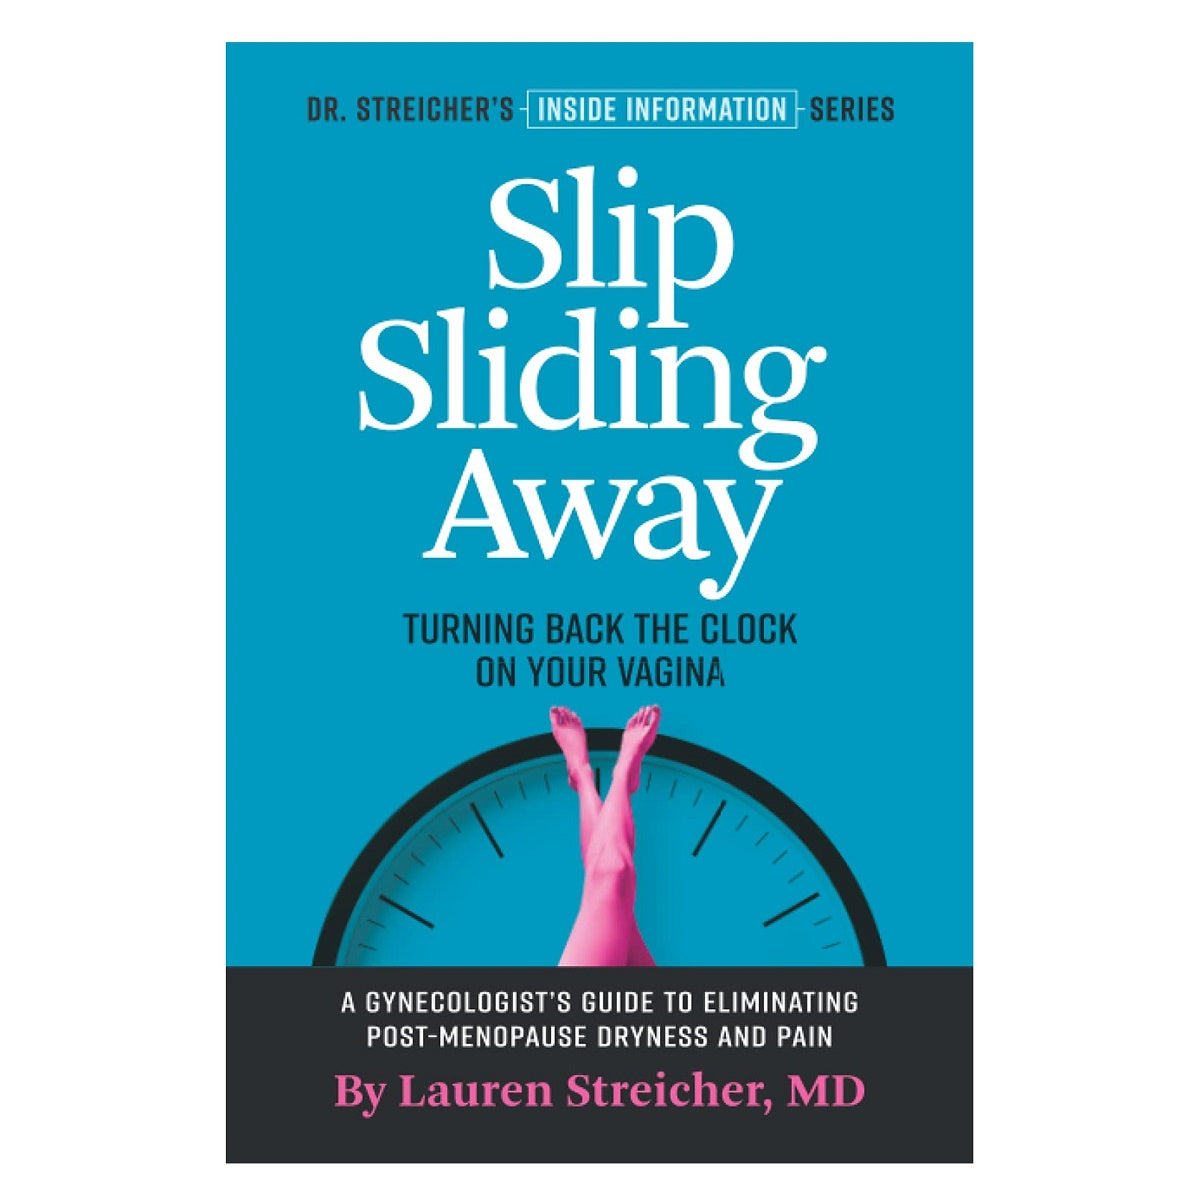 Slip Sliding Away: Turning Back the Clock on Your Vagina by Dr